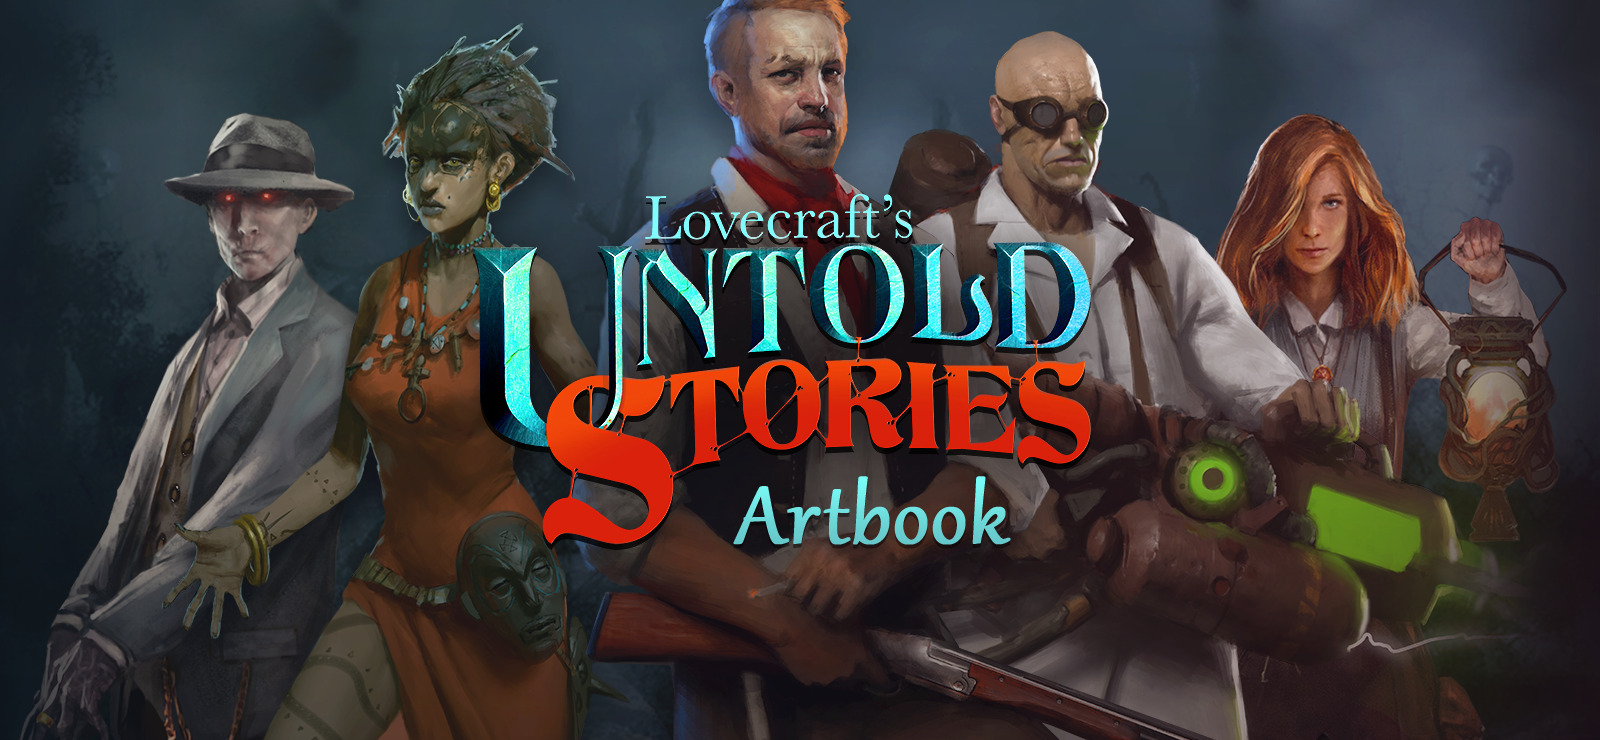 About: Lovecraft's Untold Stories Artbook is a collection of the most ...